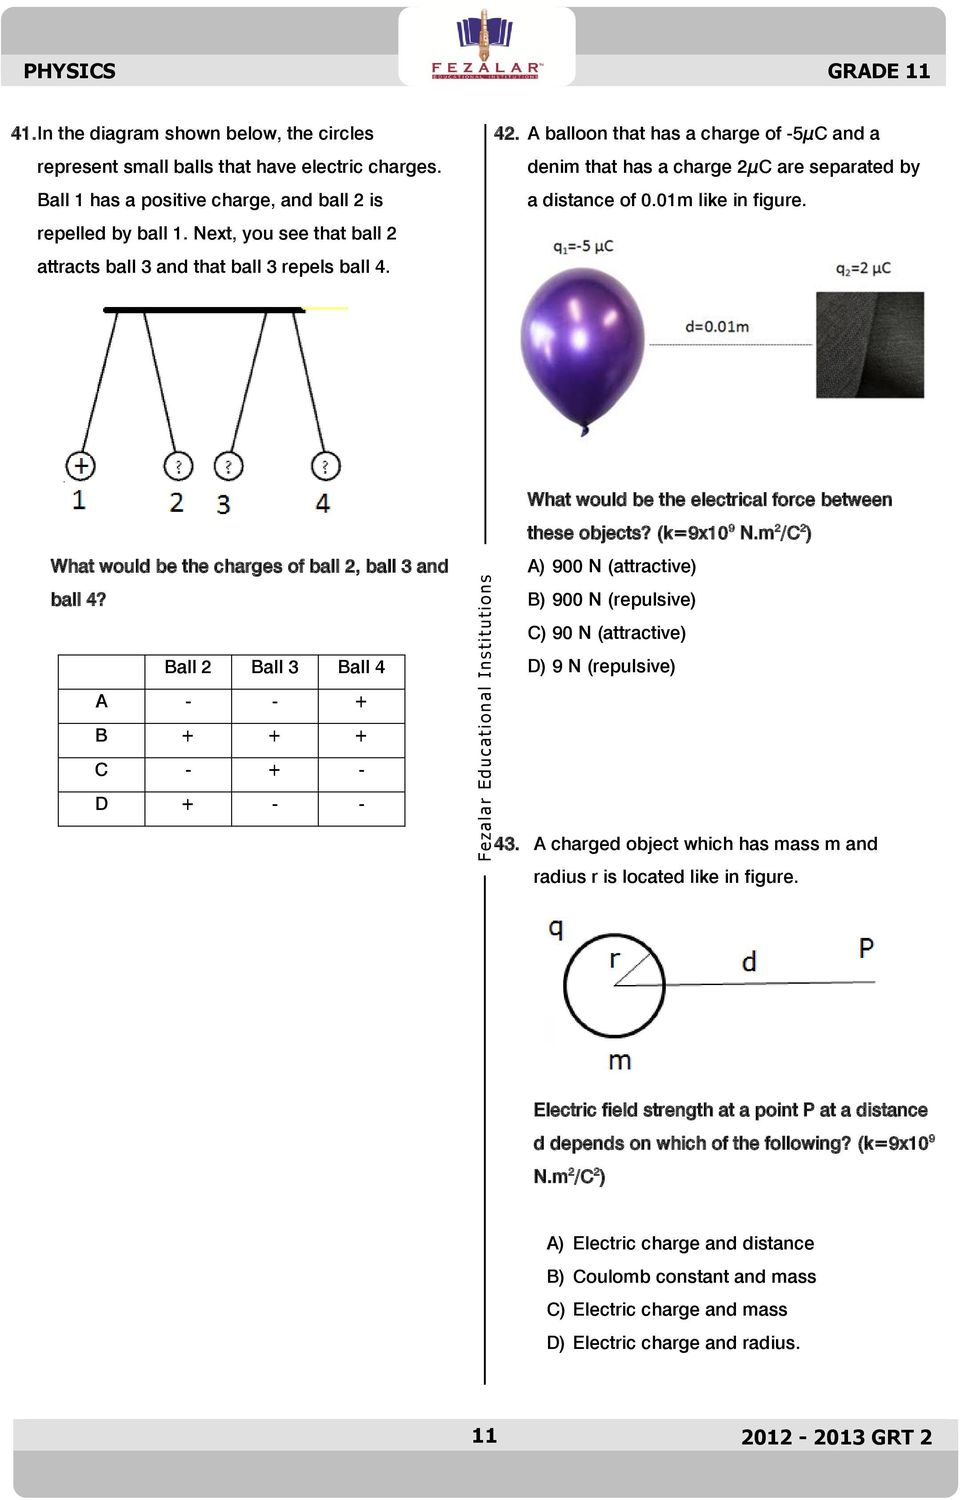 A balloon that has a charge of -5µC and a denim that has a charge 2µC are separated by a distance of 0.01m like in figure. What would be the charges of ball 2, ball 3 and ball 4?